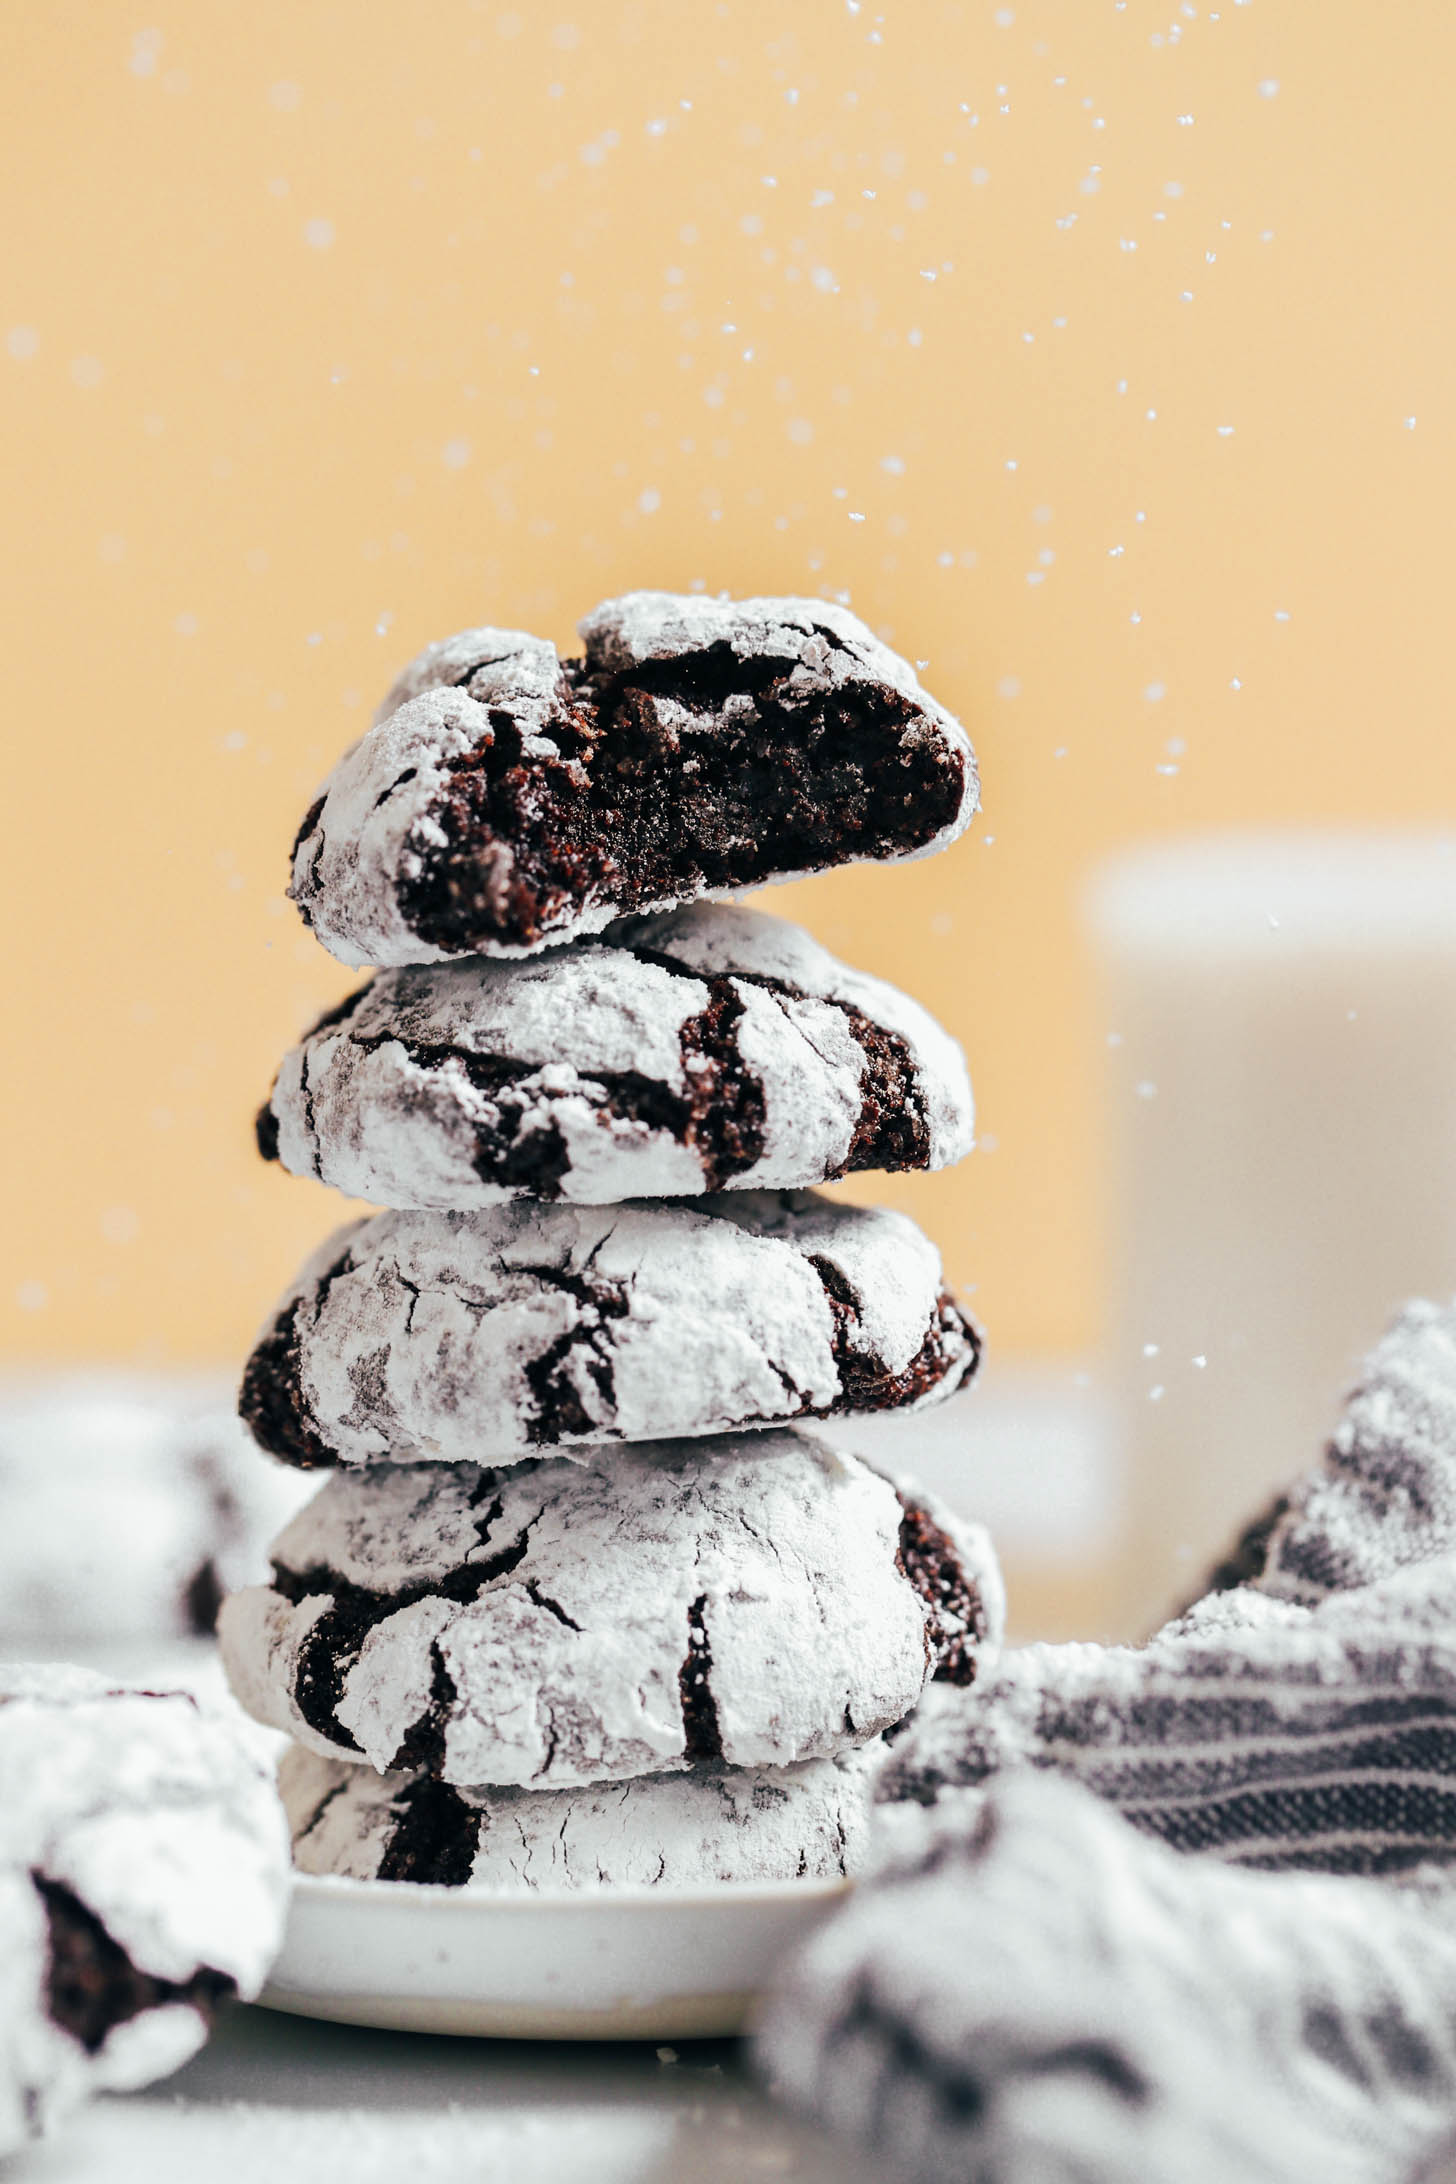 Sprinkling powdered sugar on a stack of chocolate crinkle cookies with the top cookie showing the inner fudgy center